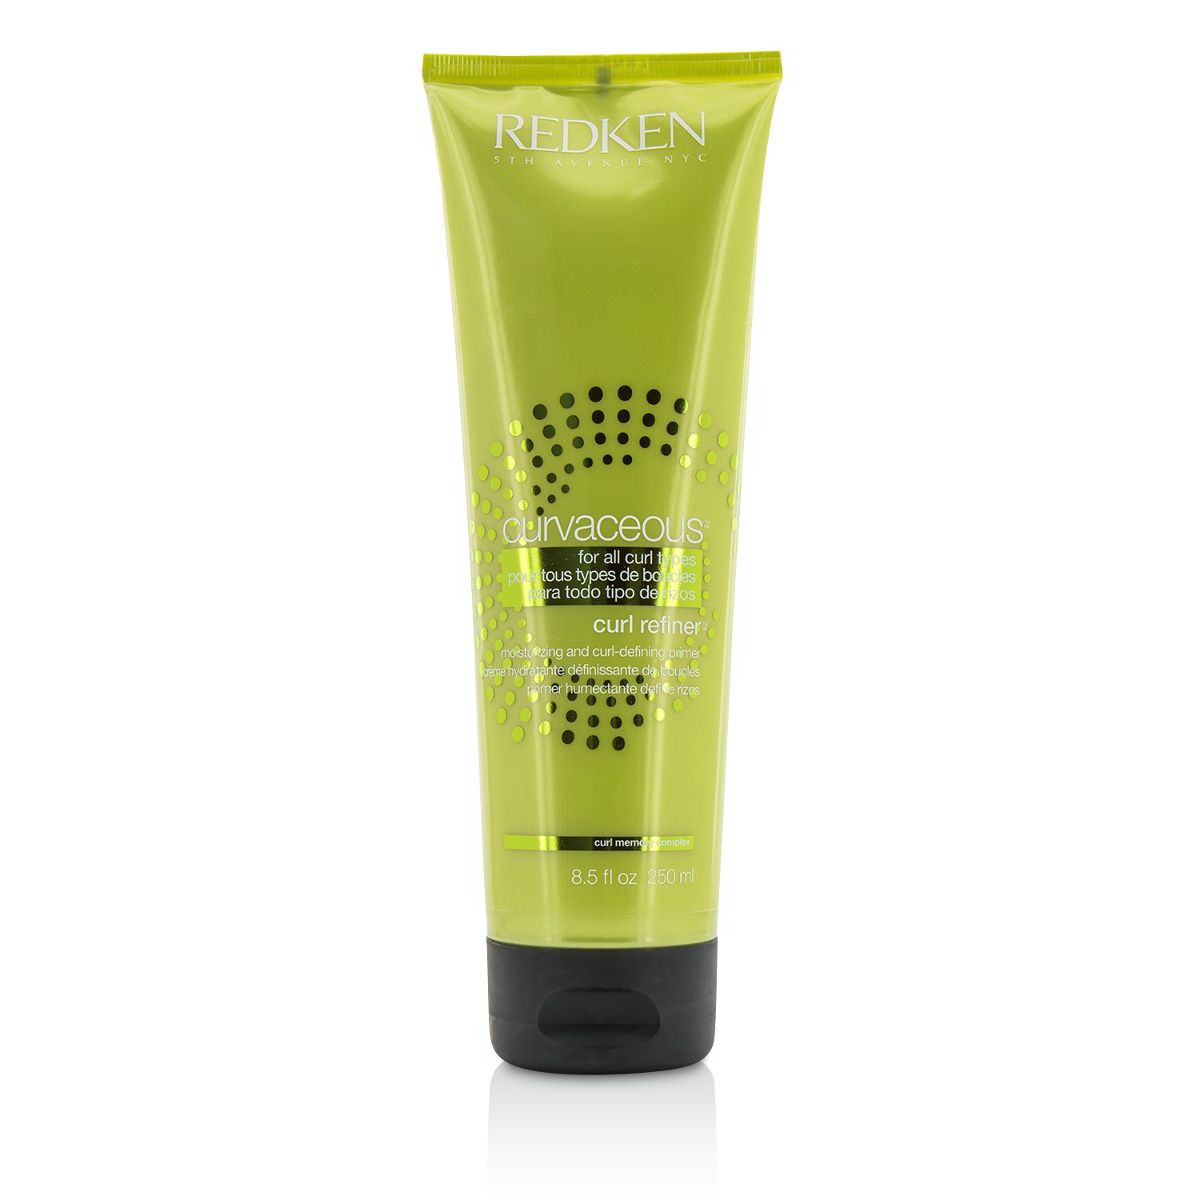 Curvaceous Curl Refiner Moisturizing and Curl-Defining Primer (For All Curls) Redken Image